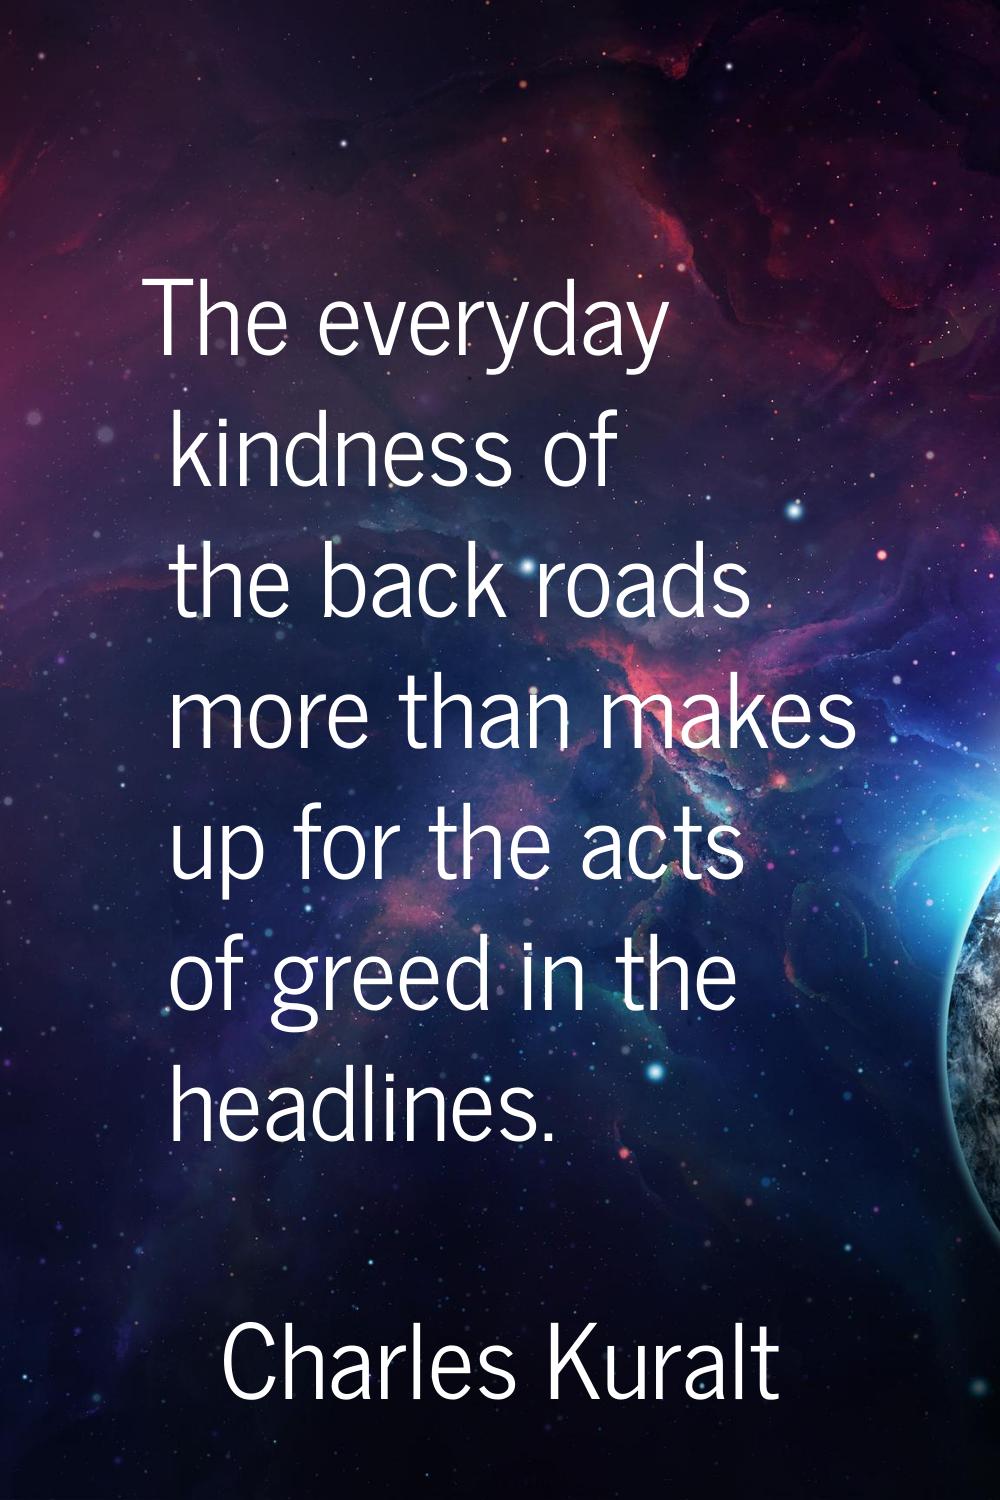 The everyday kindness of the back roads more than makes up for the acts of greed in the headlines.